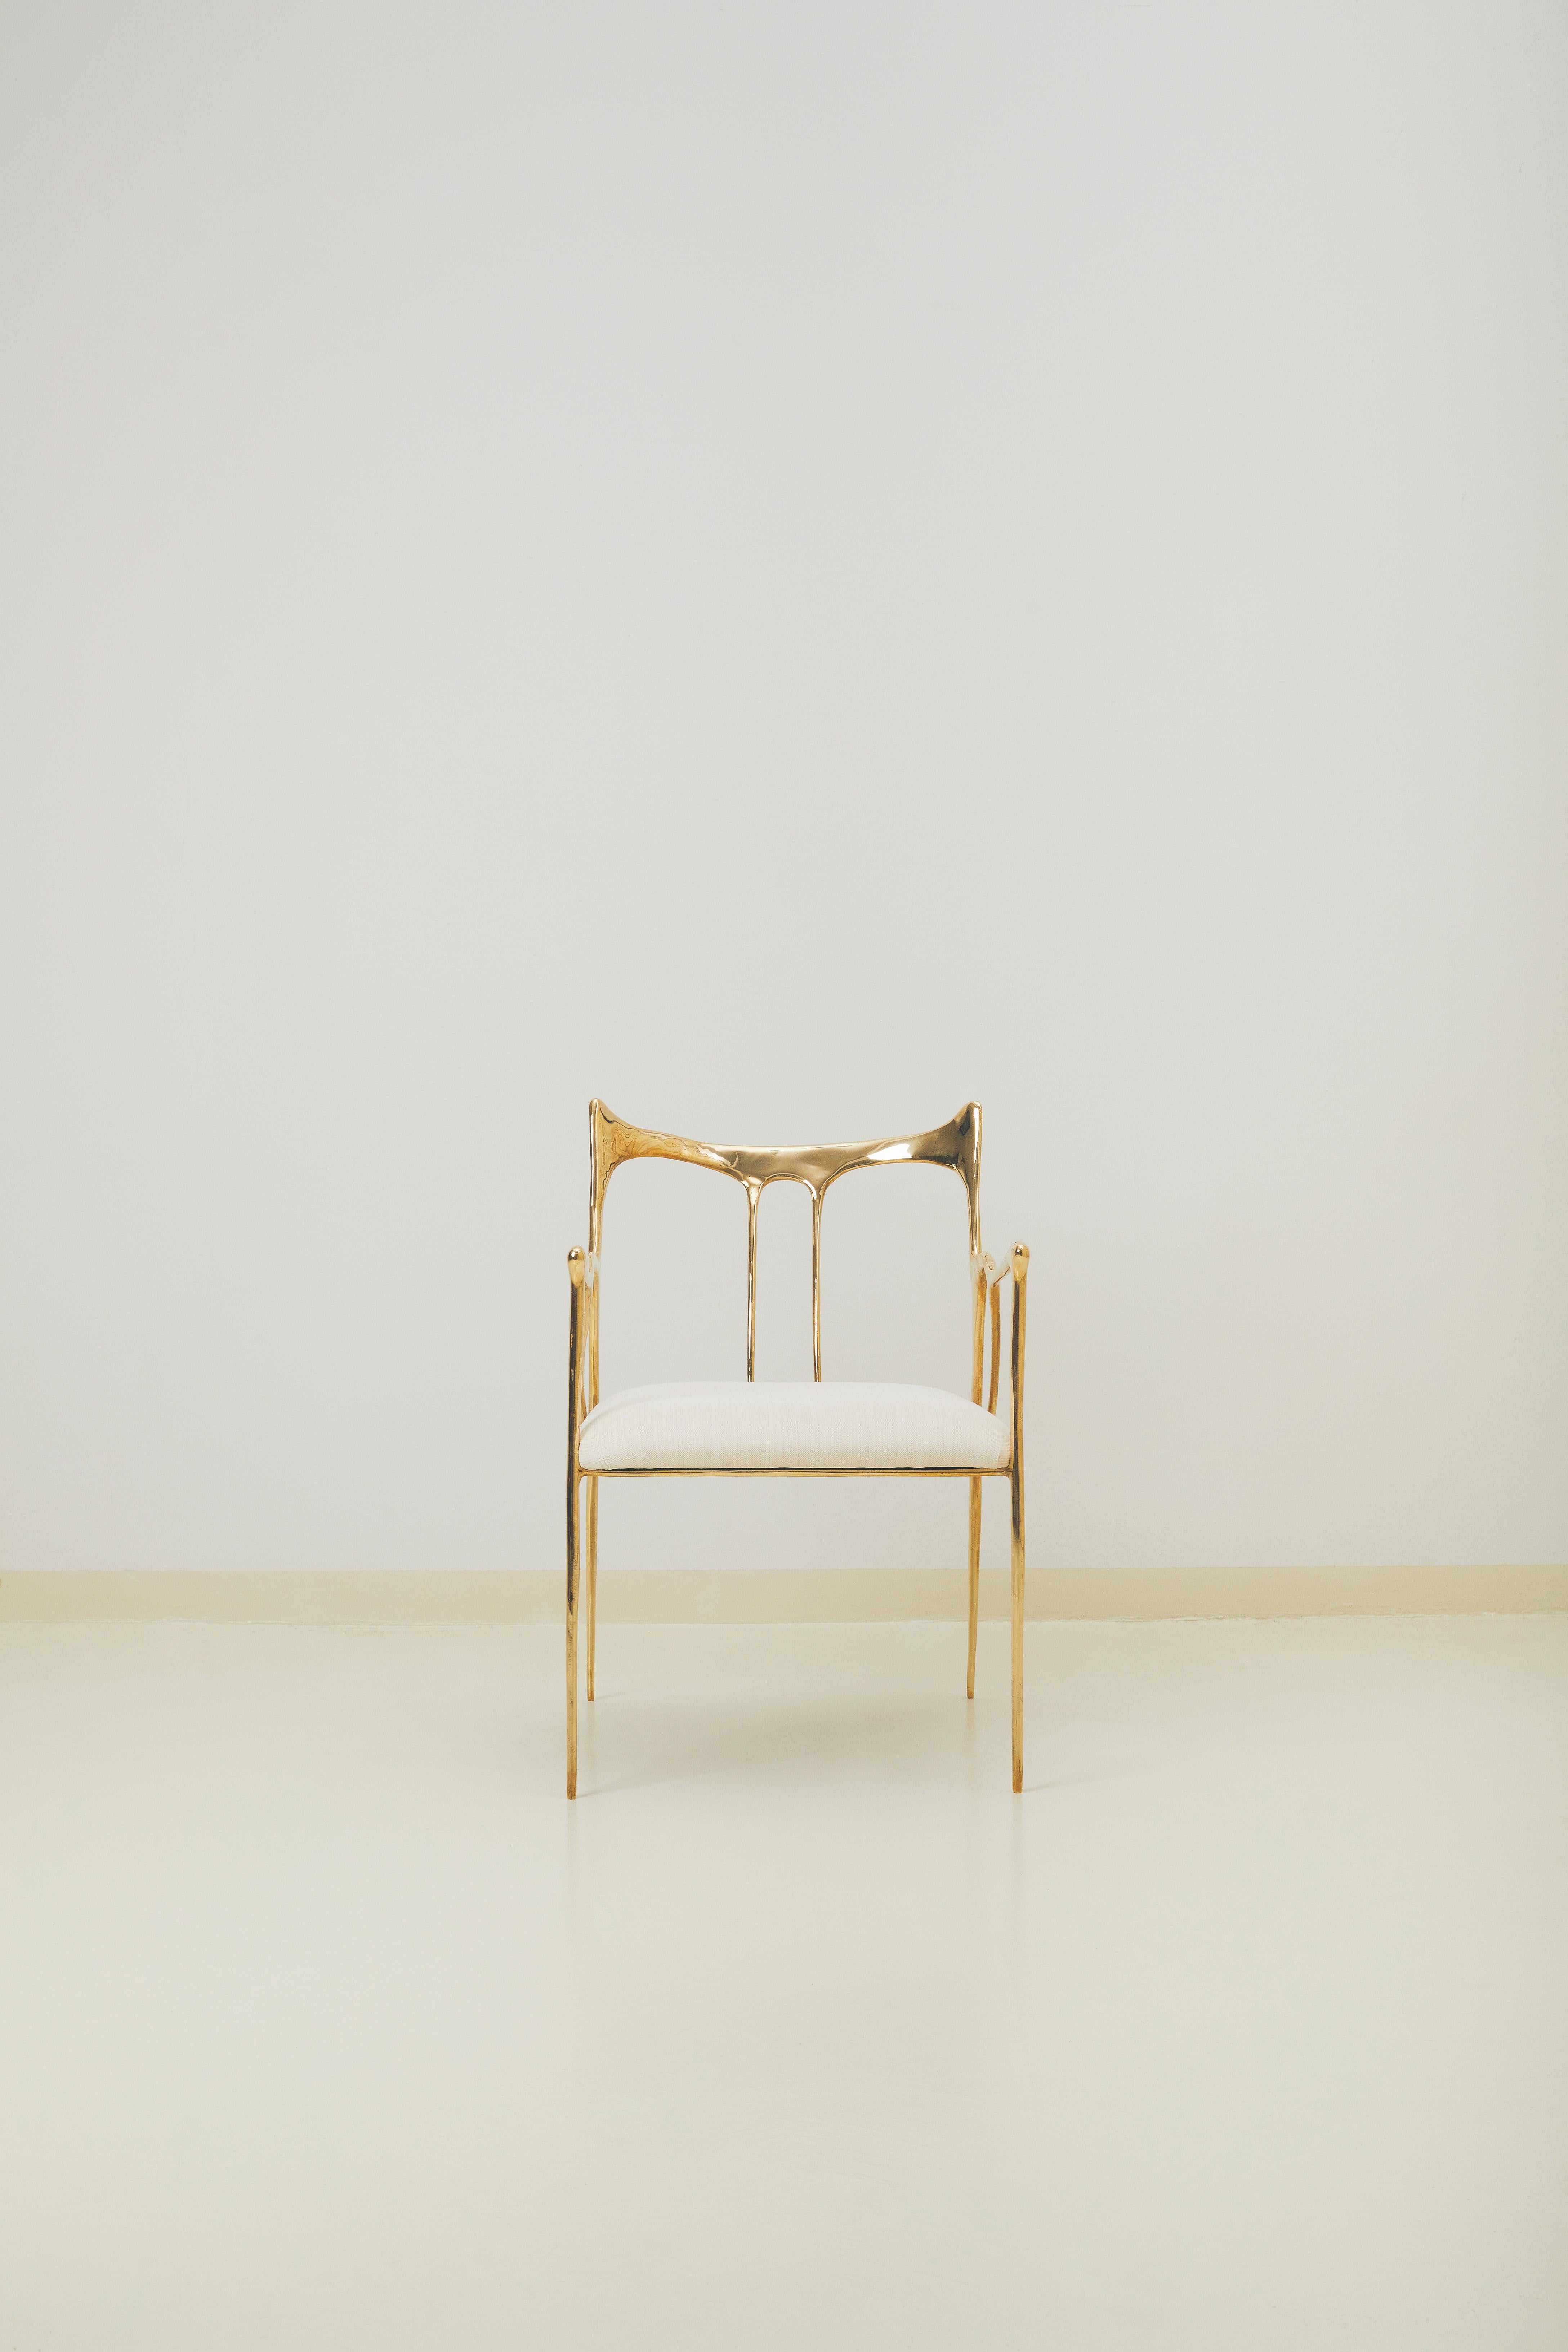 Post-Modern Calligraphic Sculpted Brass Chair by Misaya